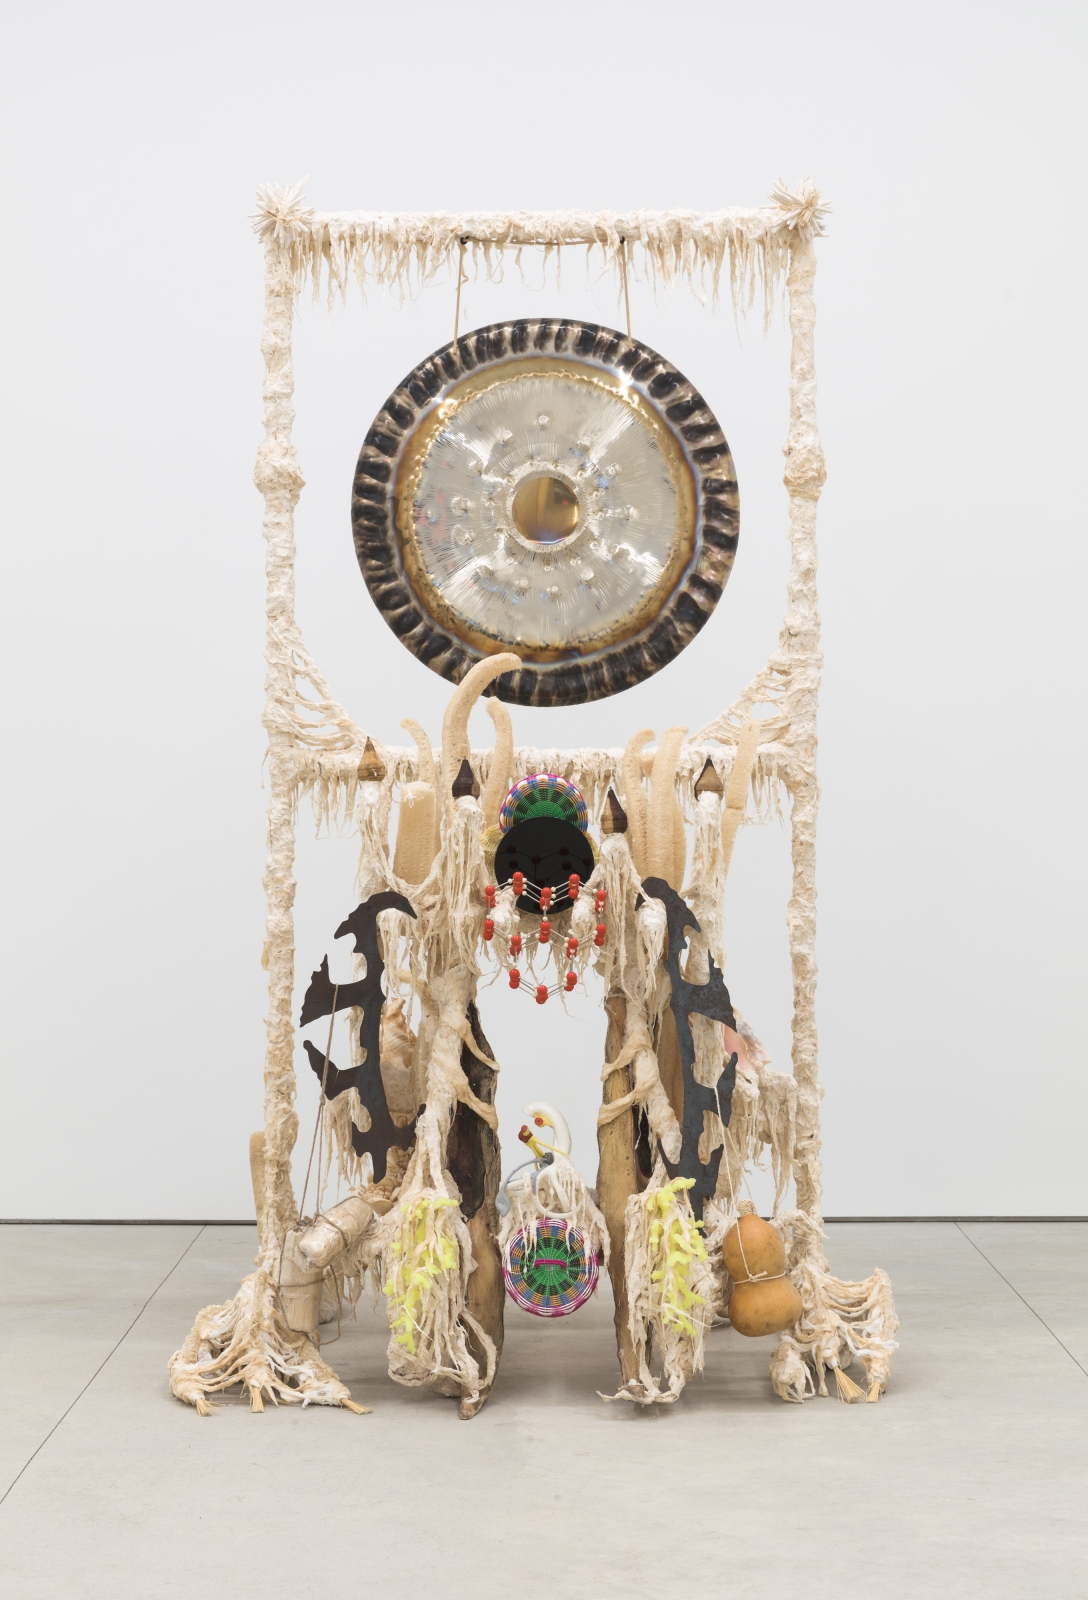 Guadalupe Maravilla
Disease Thrower #10, 2020
gong, steel, wood, cotton, glue mixture, plastic, loofah, and objects collected from a ritual of retracing the artist&amp;#39;s original migration route
96 x 57 x 63 ins.
243.8 x 144.8 x 160 cm